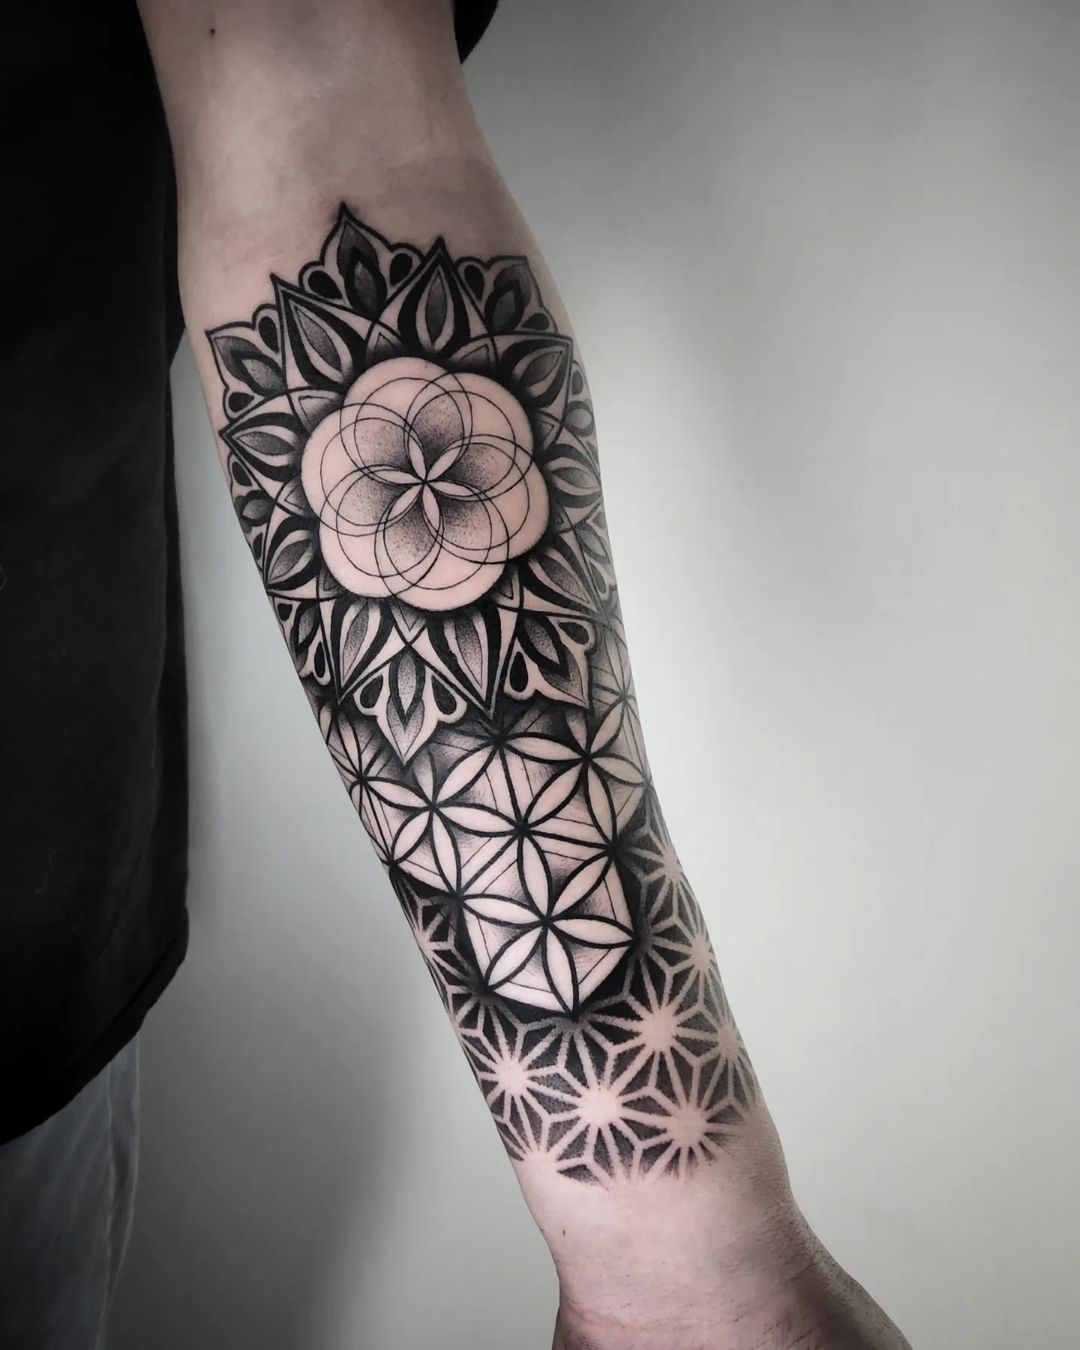 Black and White Flower of Life Tattoo on Arm